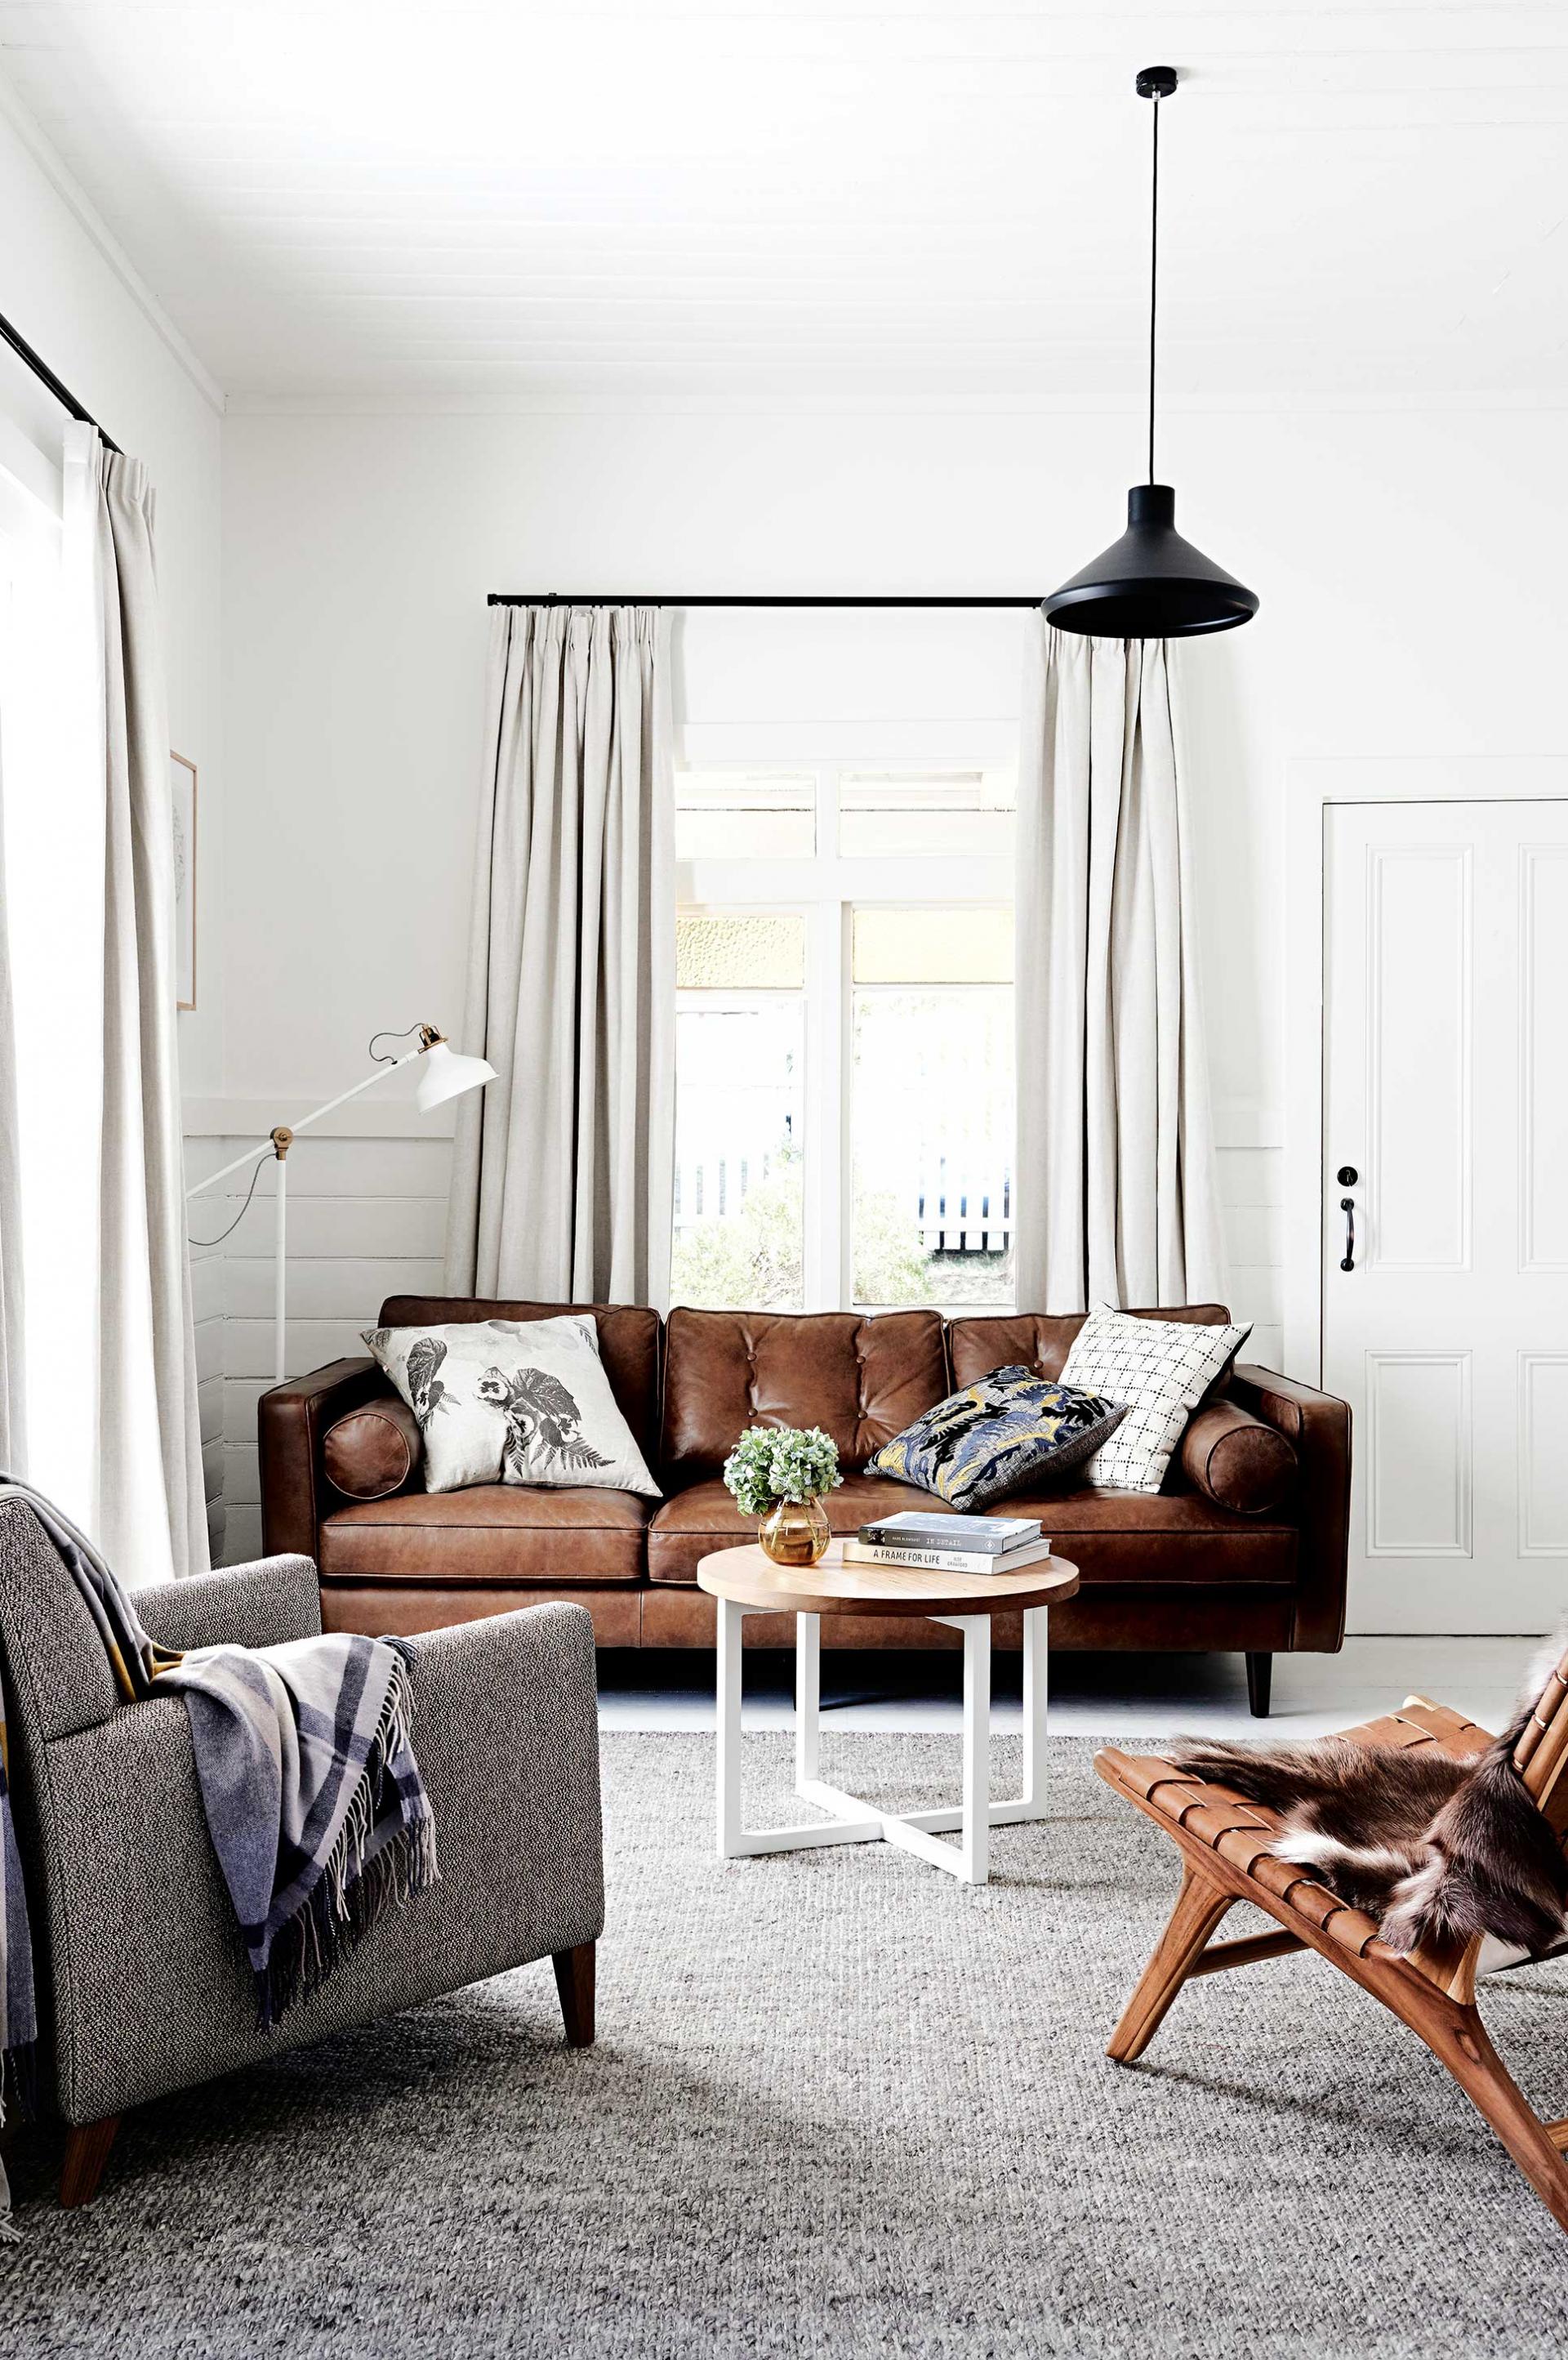 Modern Looks For Leather Sofas, Does Grey Go With Brown Leather Sofa